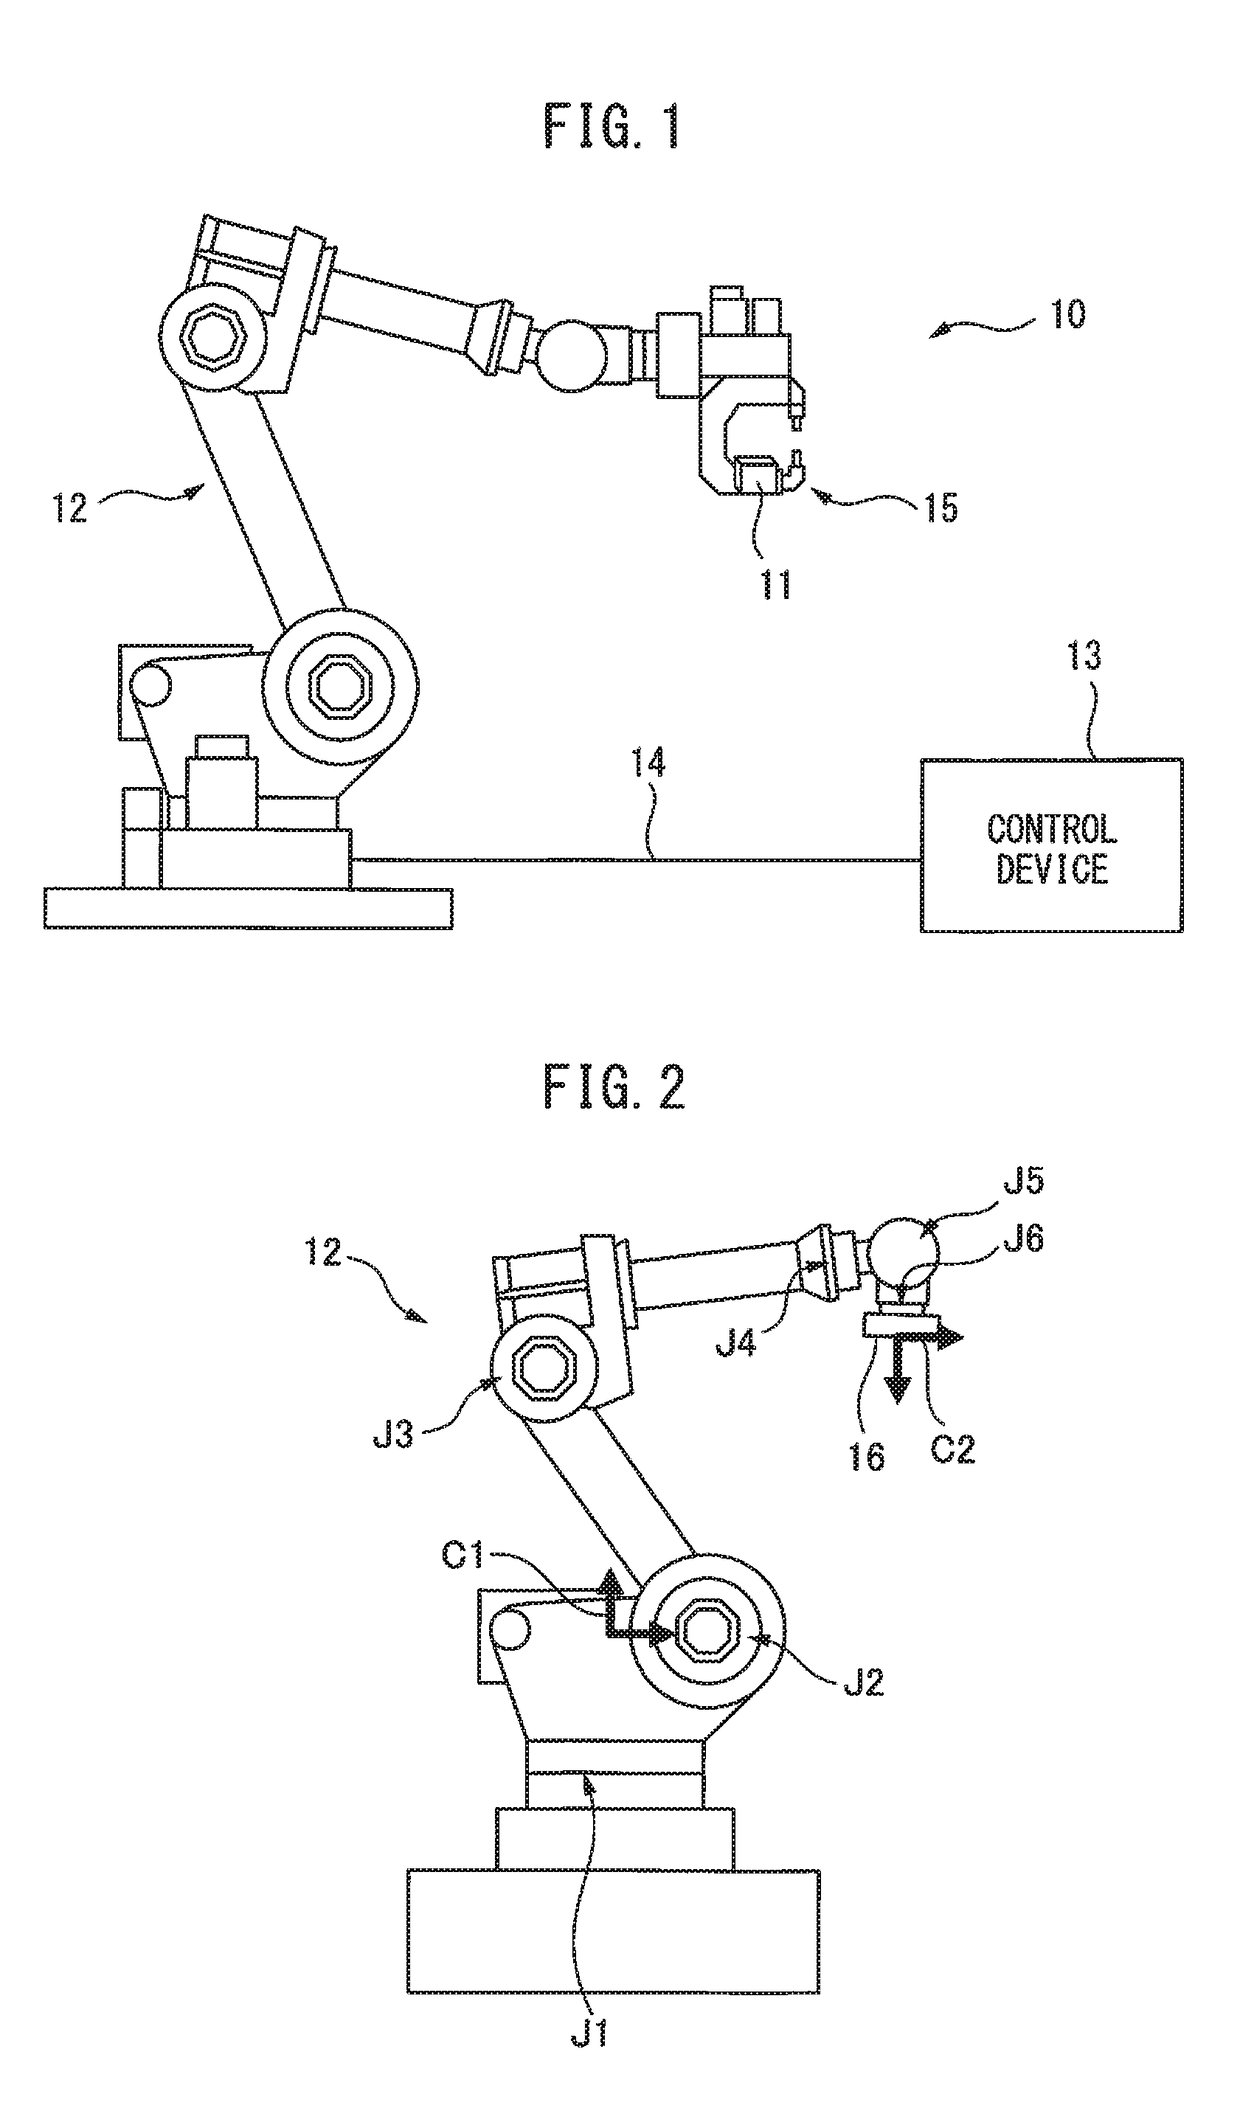 Robot for controlling learning in view of operation in production line, and method of controlling the same